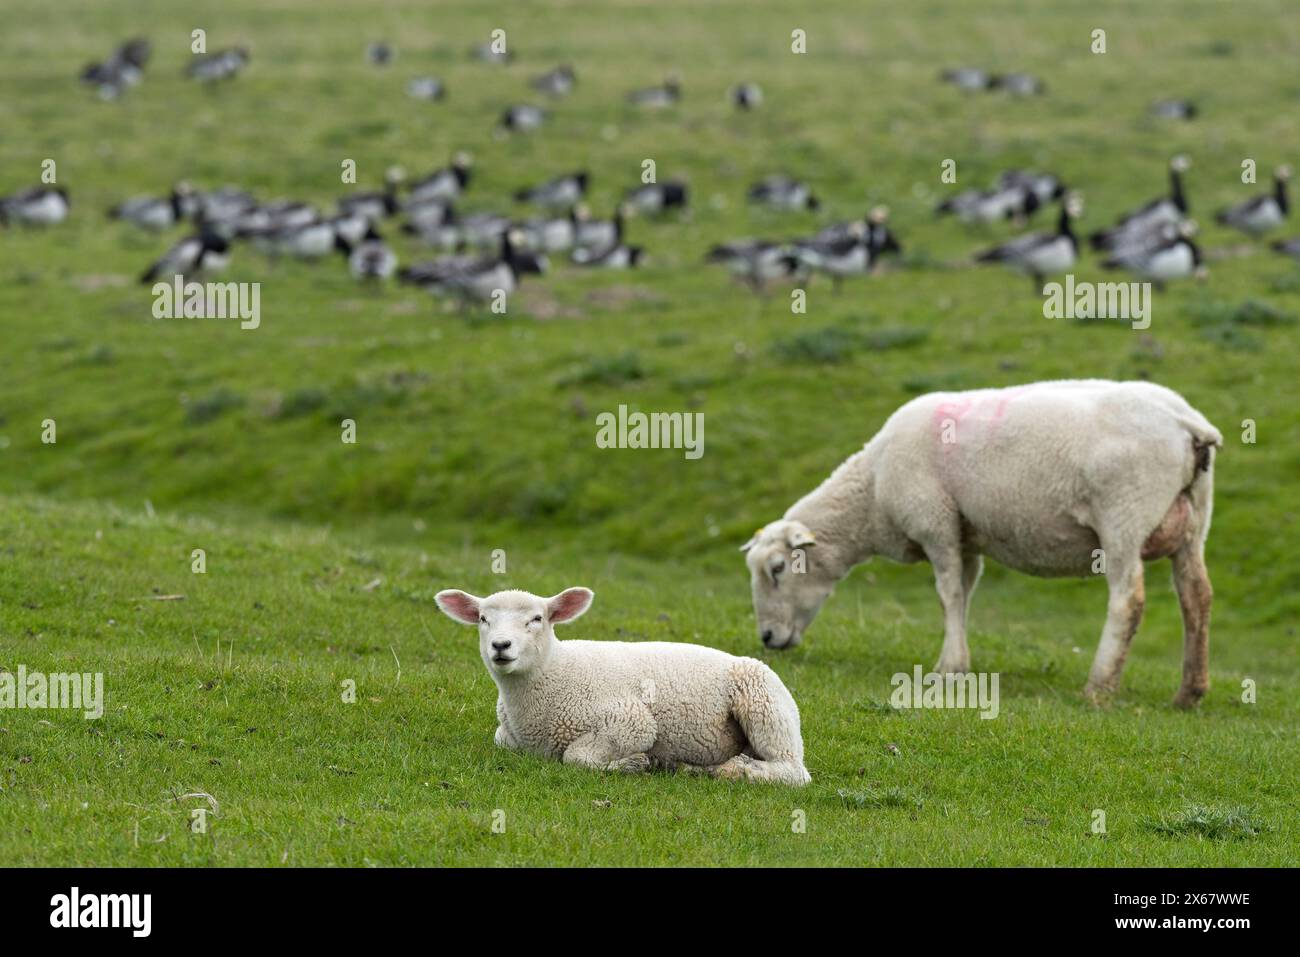 Sheep, young sheep and dam, Eiderstedt peninsula, Germany, Schleswig-Holstein, North Sea coast Stock Photo